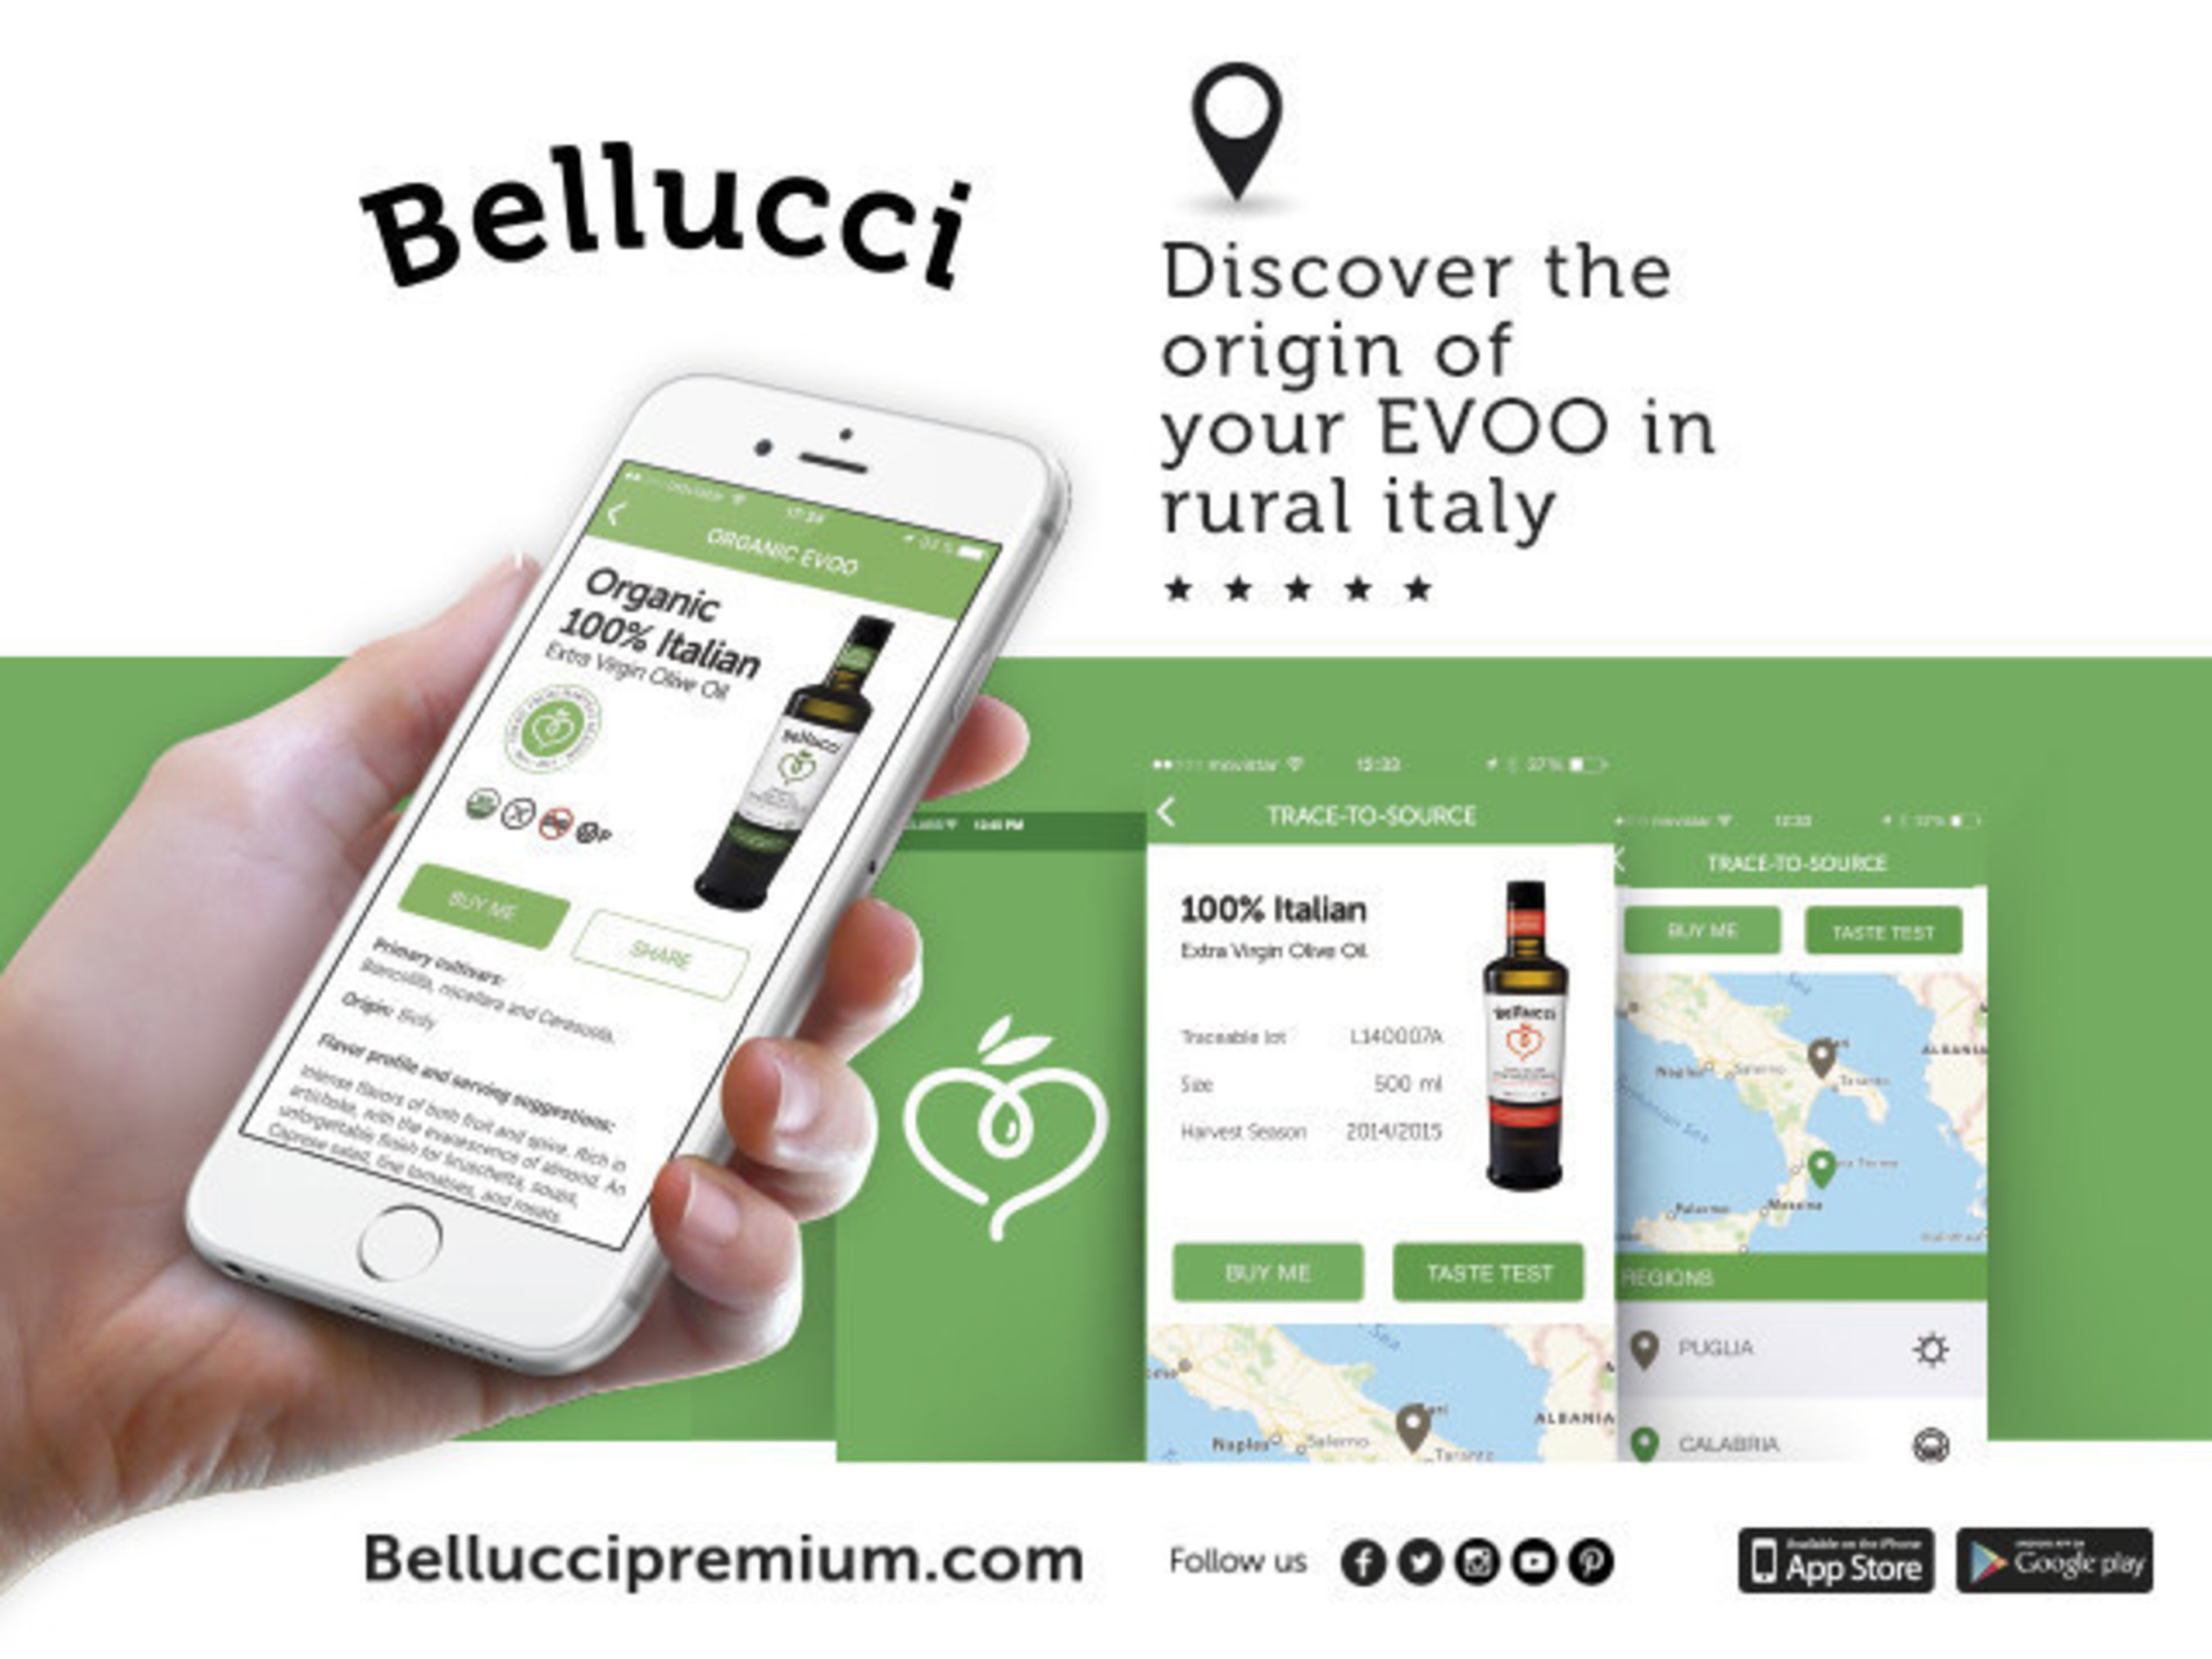 Trace any Bellucci bottle to its precise origin in rural Italy and learn to savor the flavor that comes from the land beneath the trees.